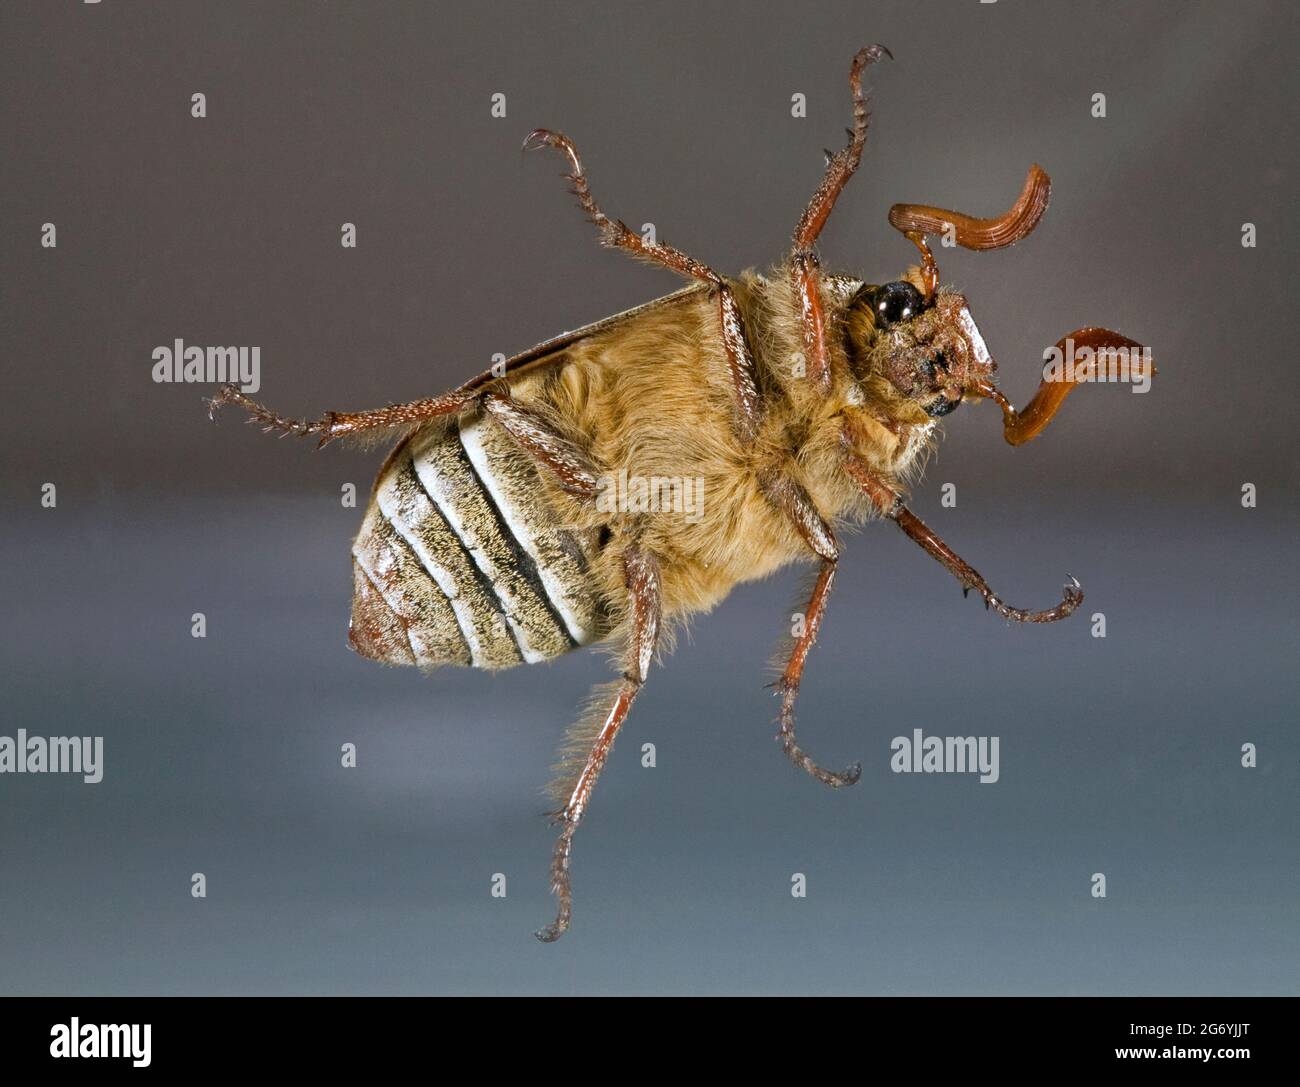 Detail of the underside of a ten-lined June beetle (Polyphylla decemlineata), also known as the watermelon beetle. It is a scarab beetle found through Stock Photo